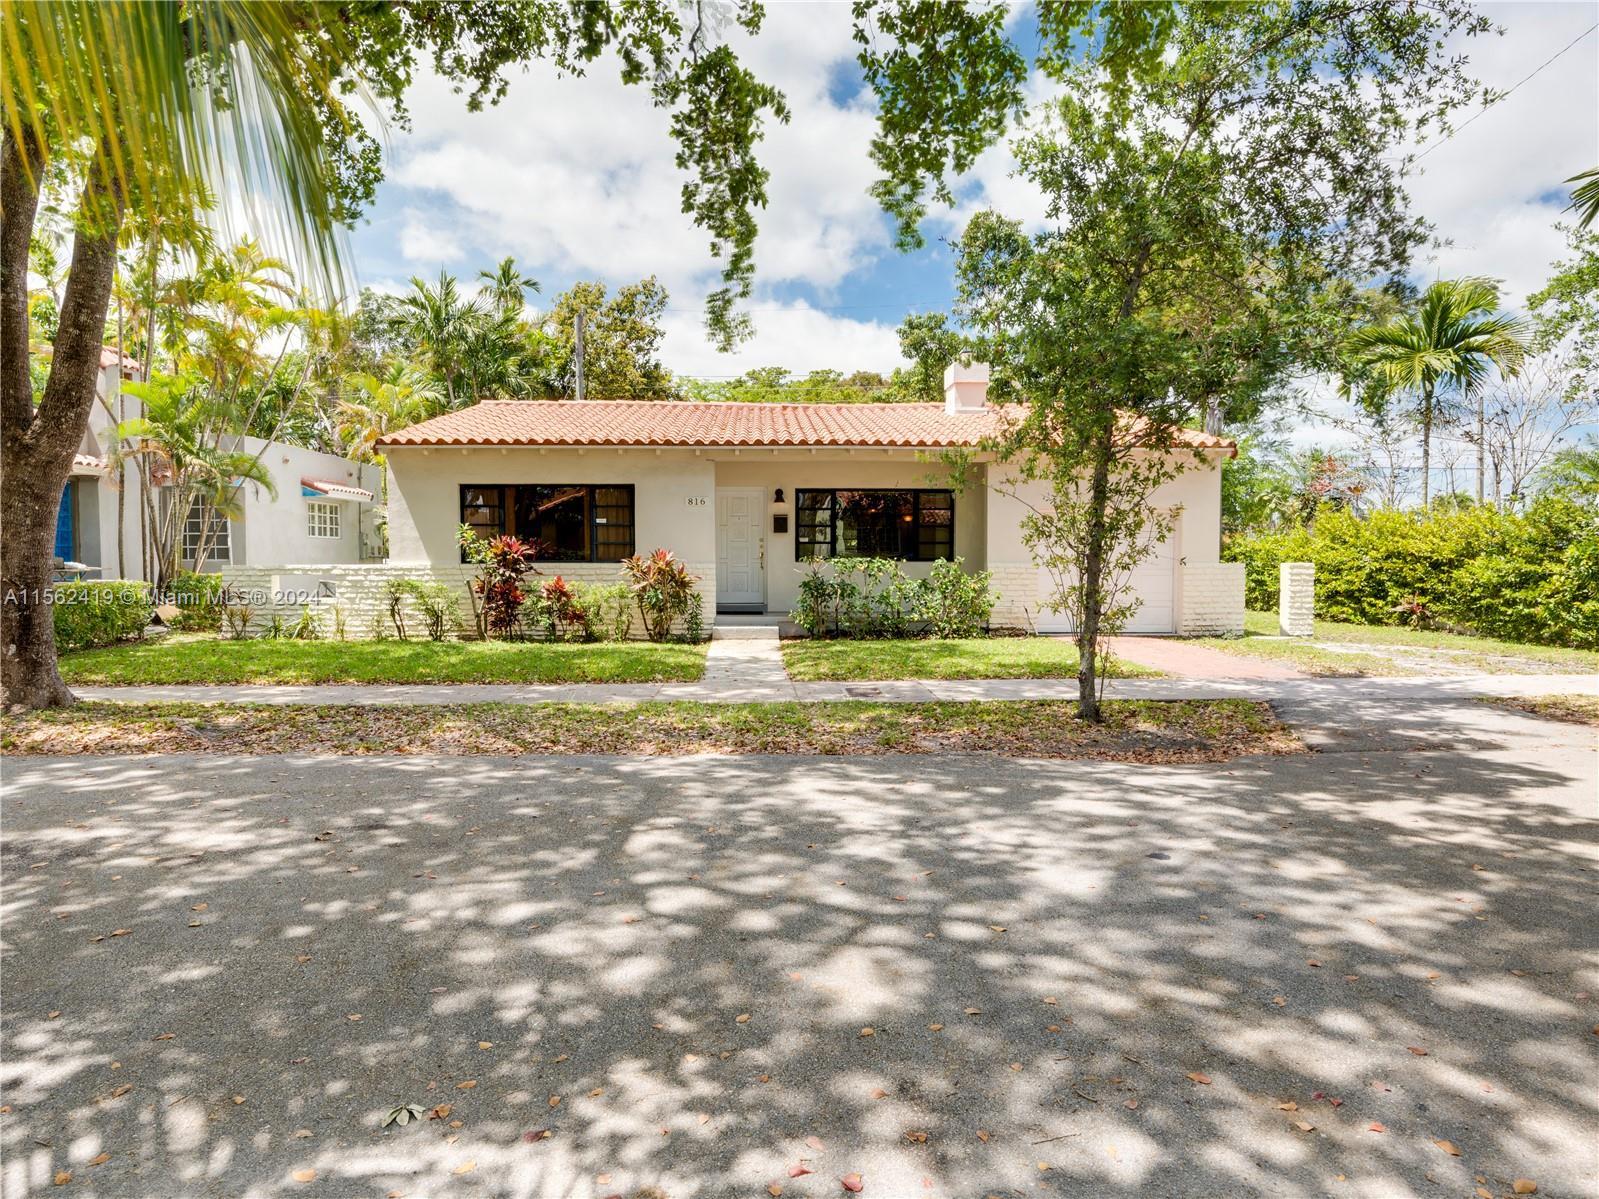 Photo of 816 Lorca St in Coral Gables, FL